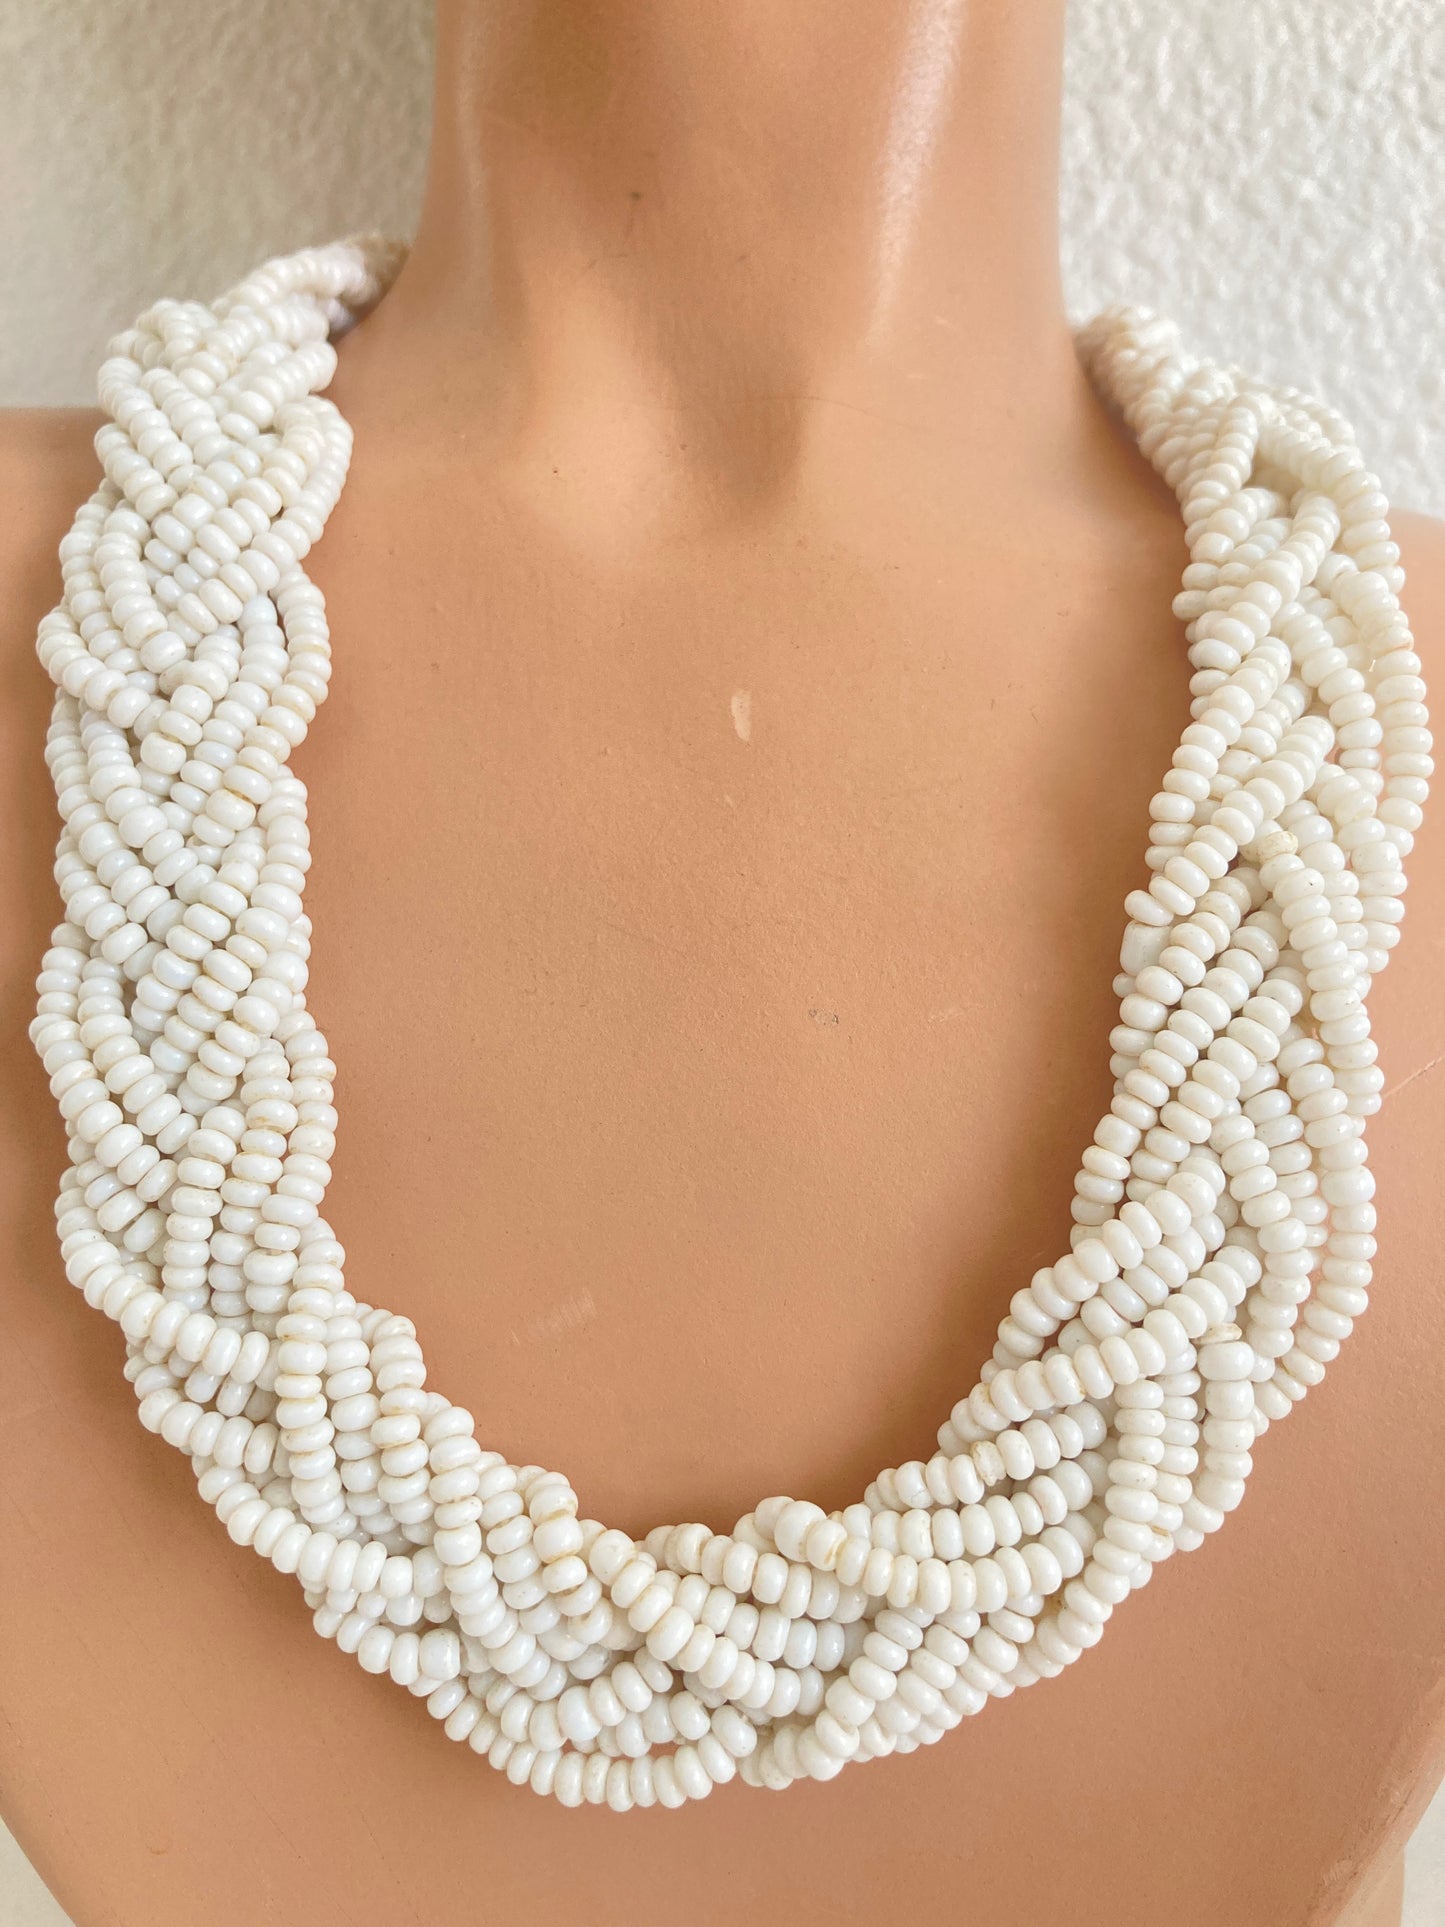 Braided White Glass Beaded Necklace Vintage Seed Beads